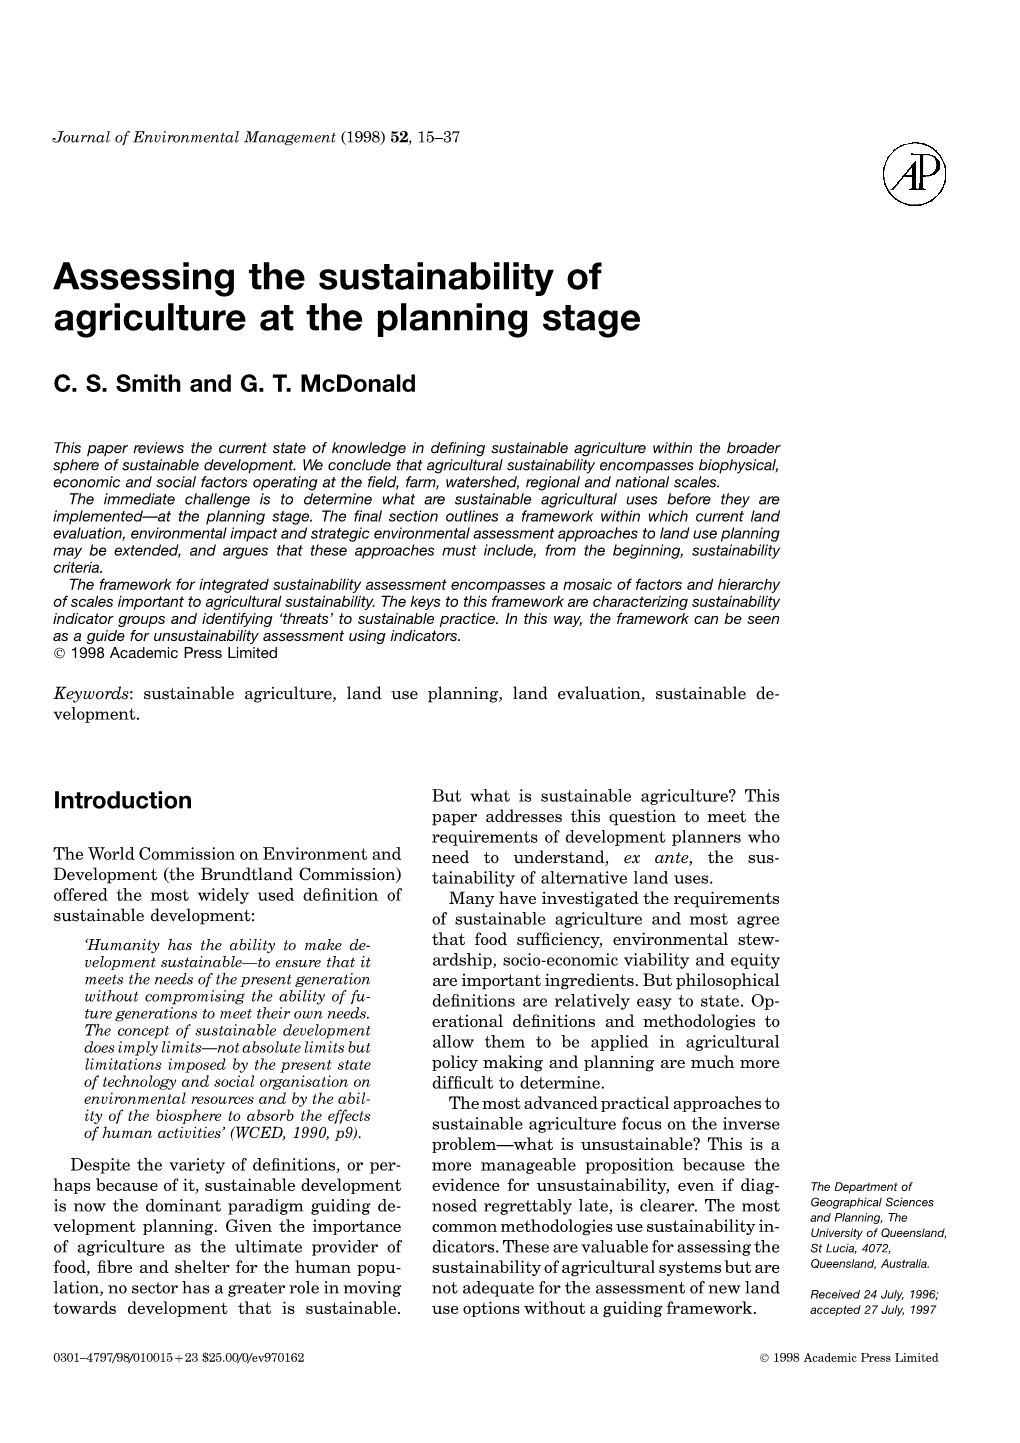 Assessing the Sustainability of Agriculture at the Planning Stage